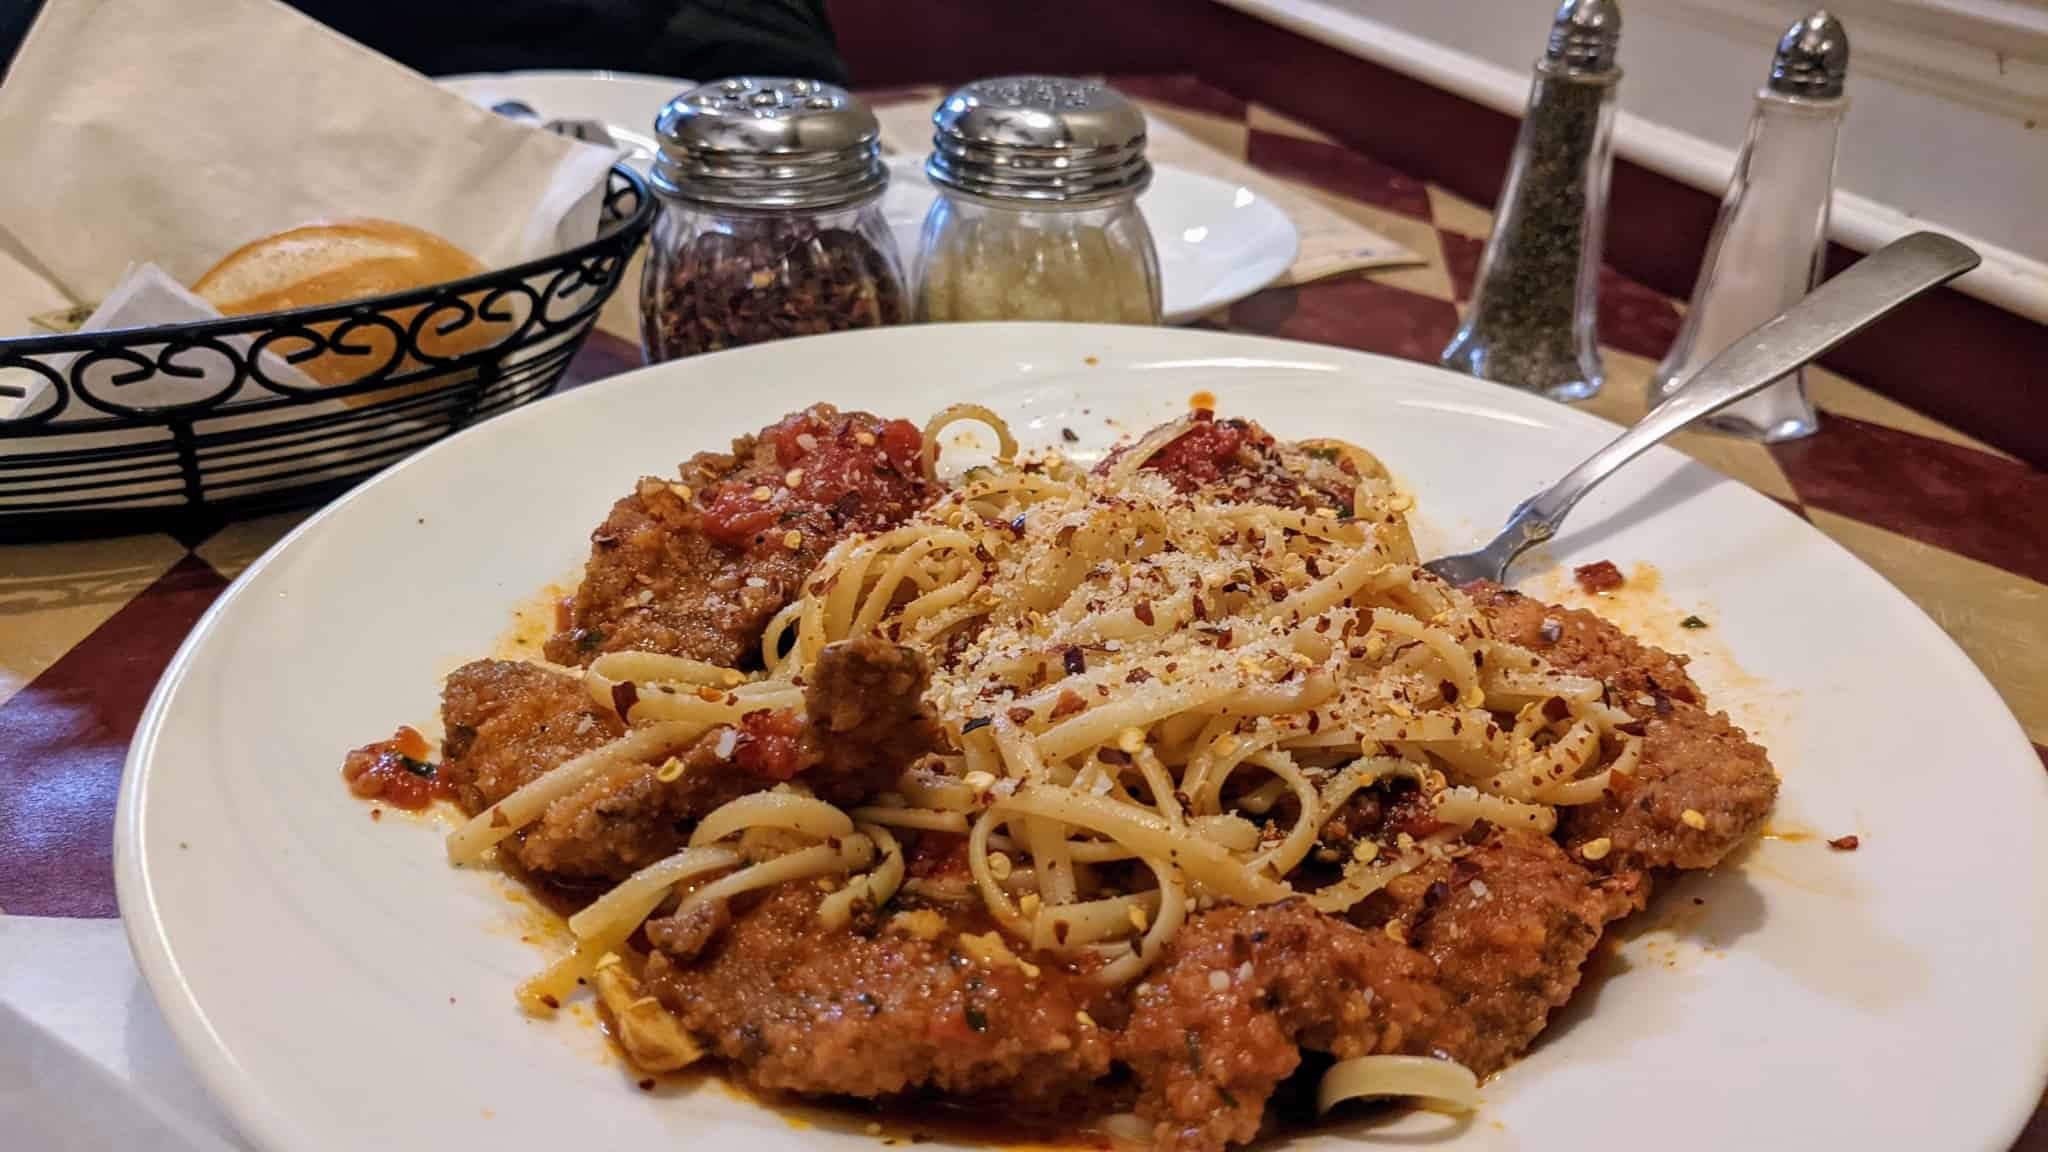 Spaghetti dish with a piece of bread behind it on a table.